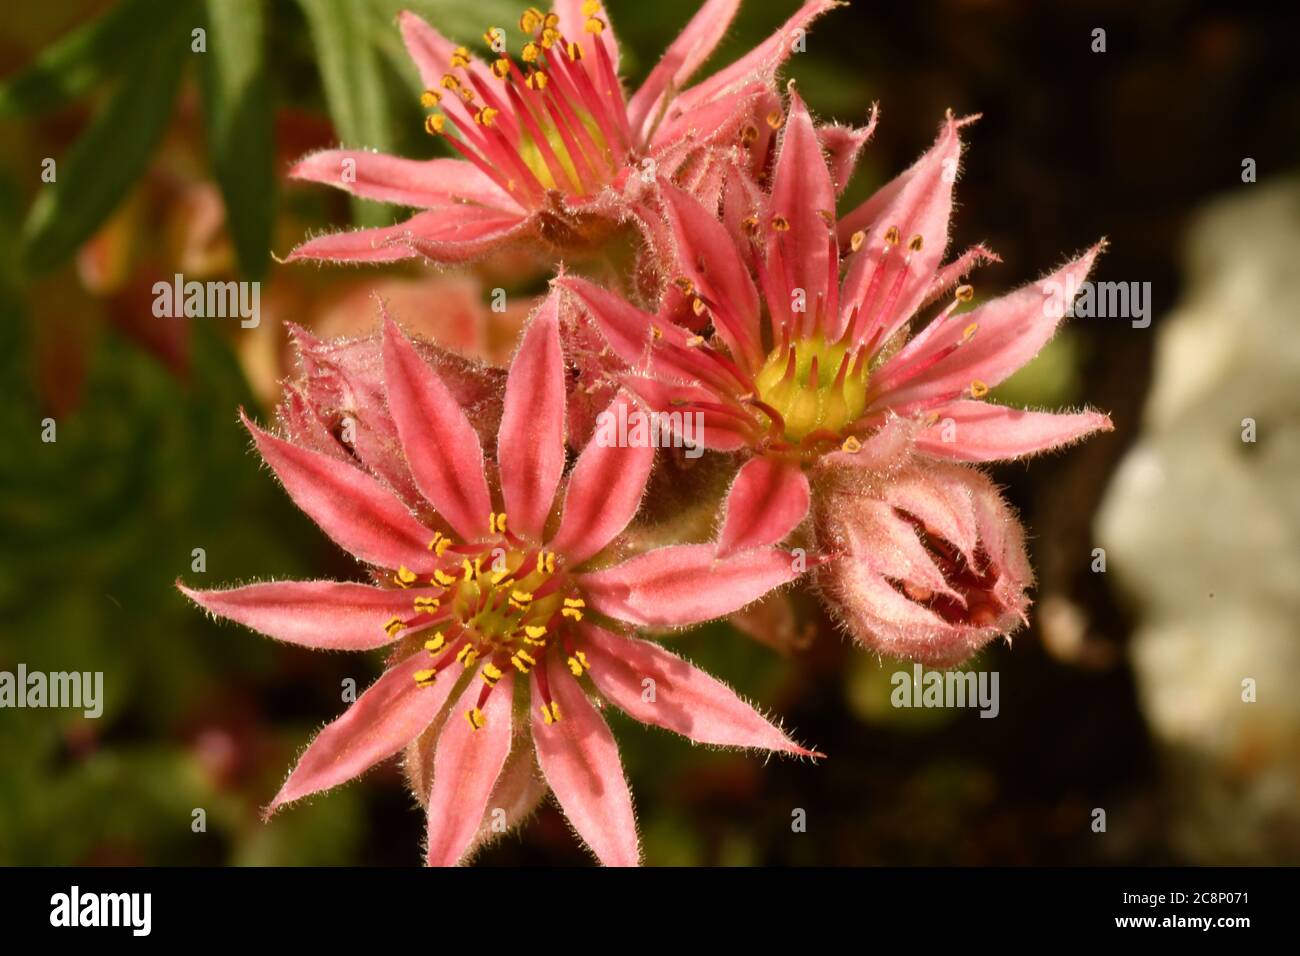 Close-up of the flower of Sempervivum, Jobivara  ‘Red Tips’,succulent perennial evergreen rosettes with fleshy green leaves. Stock Photo